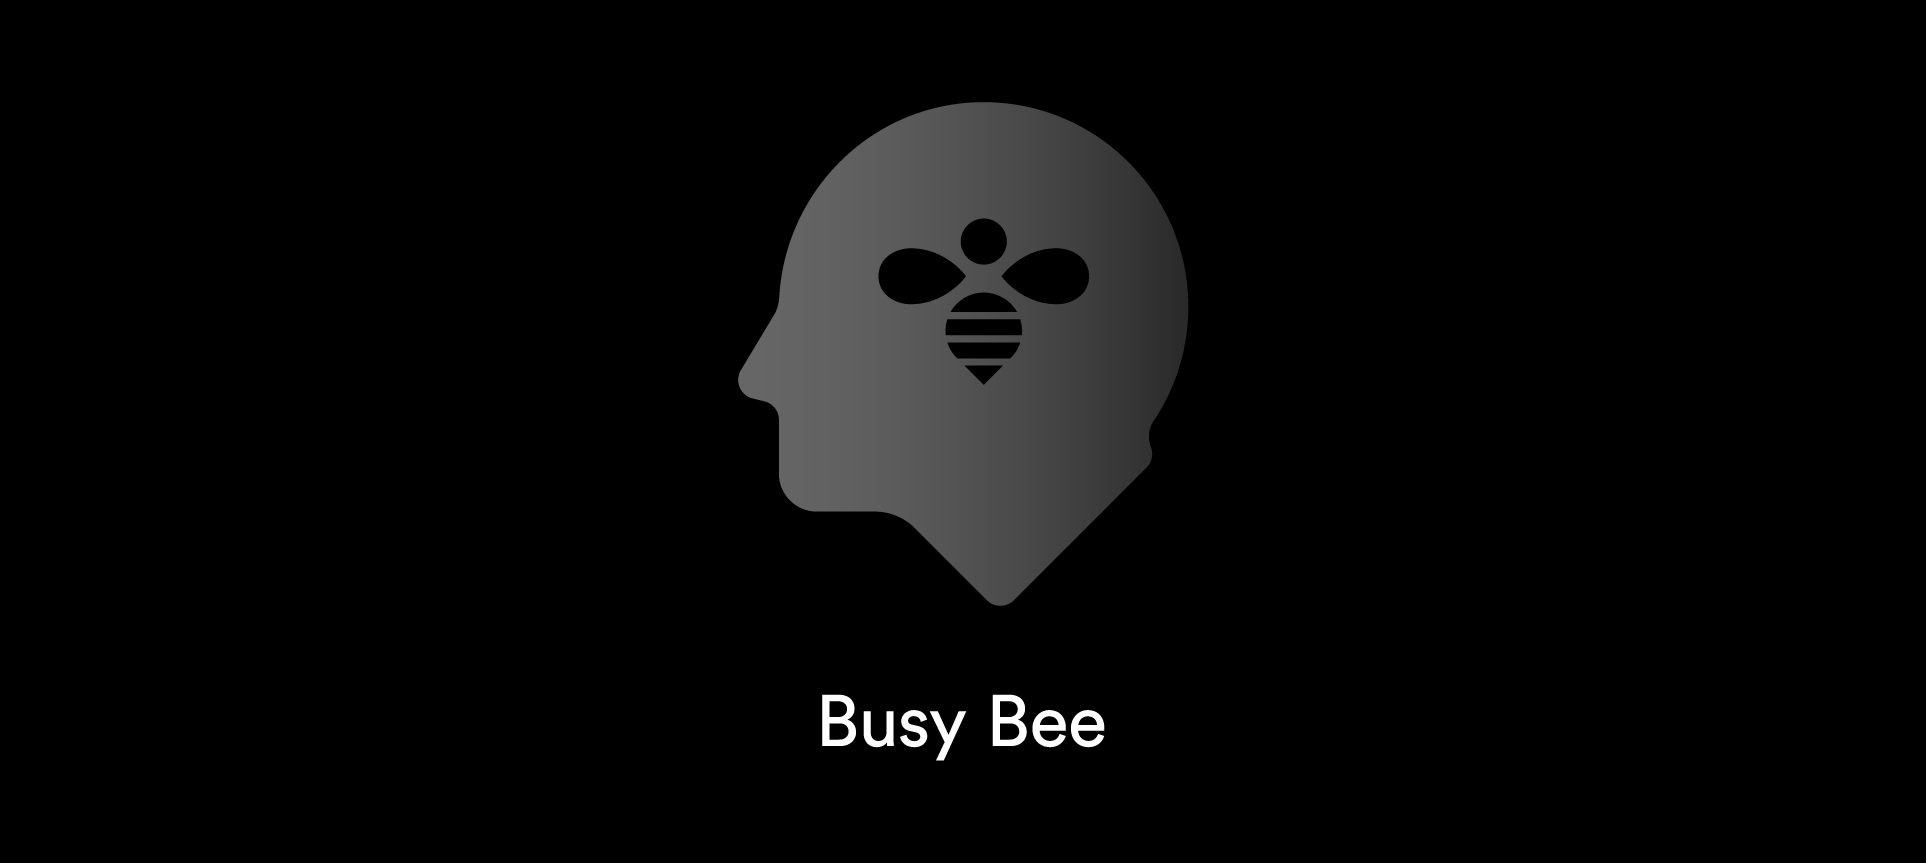 Head with bee icon and 'Busy Bee' underneath it